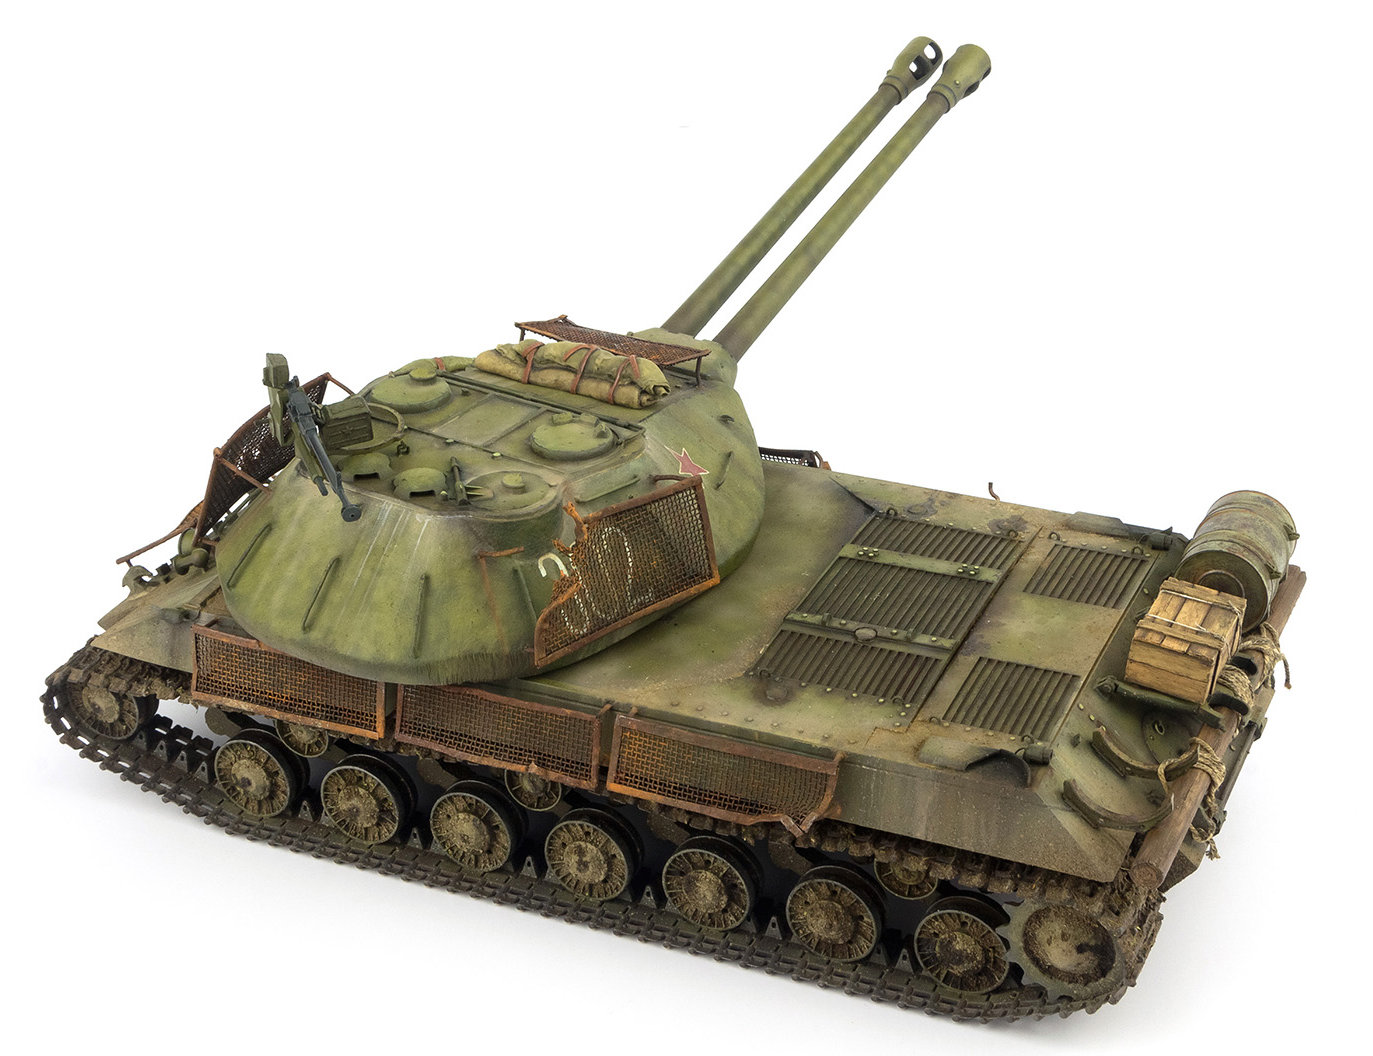 The Modelling News: Build review Pt II: 1/35th scale Soviet Object 703  Version II from Resin Scales - Adding detail before the paint